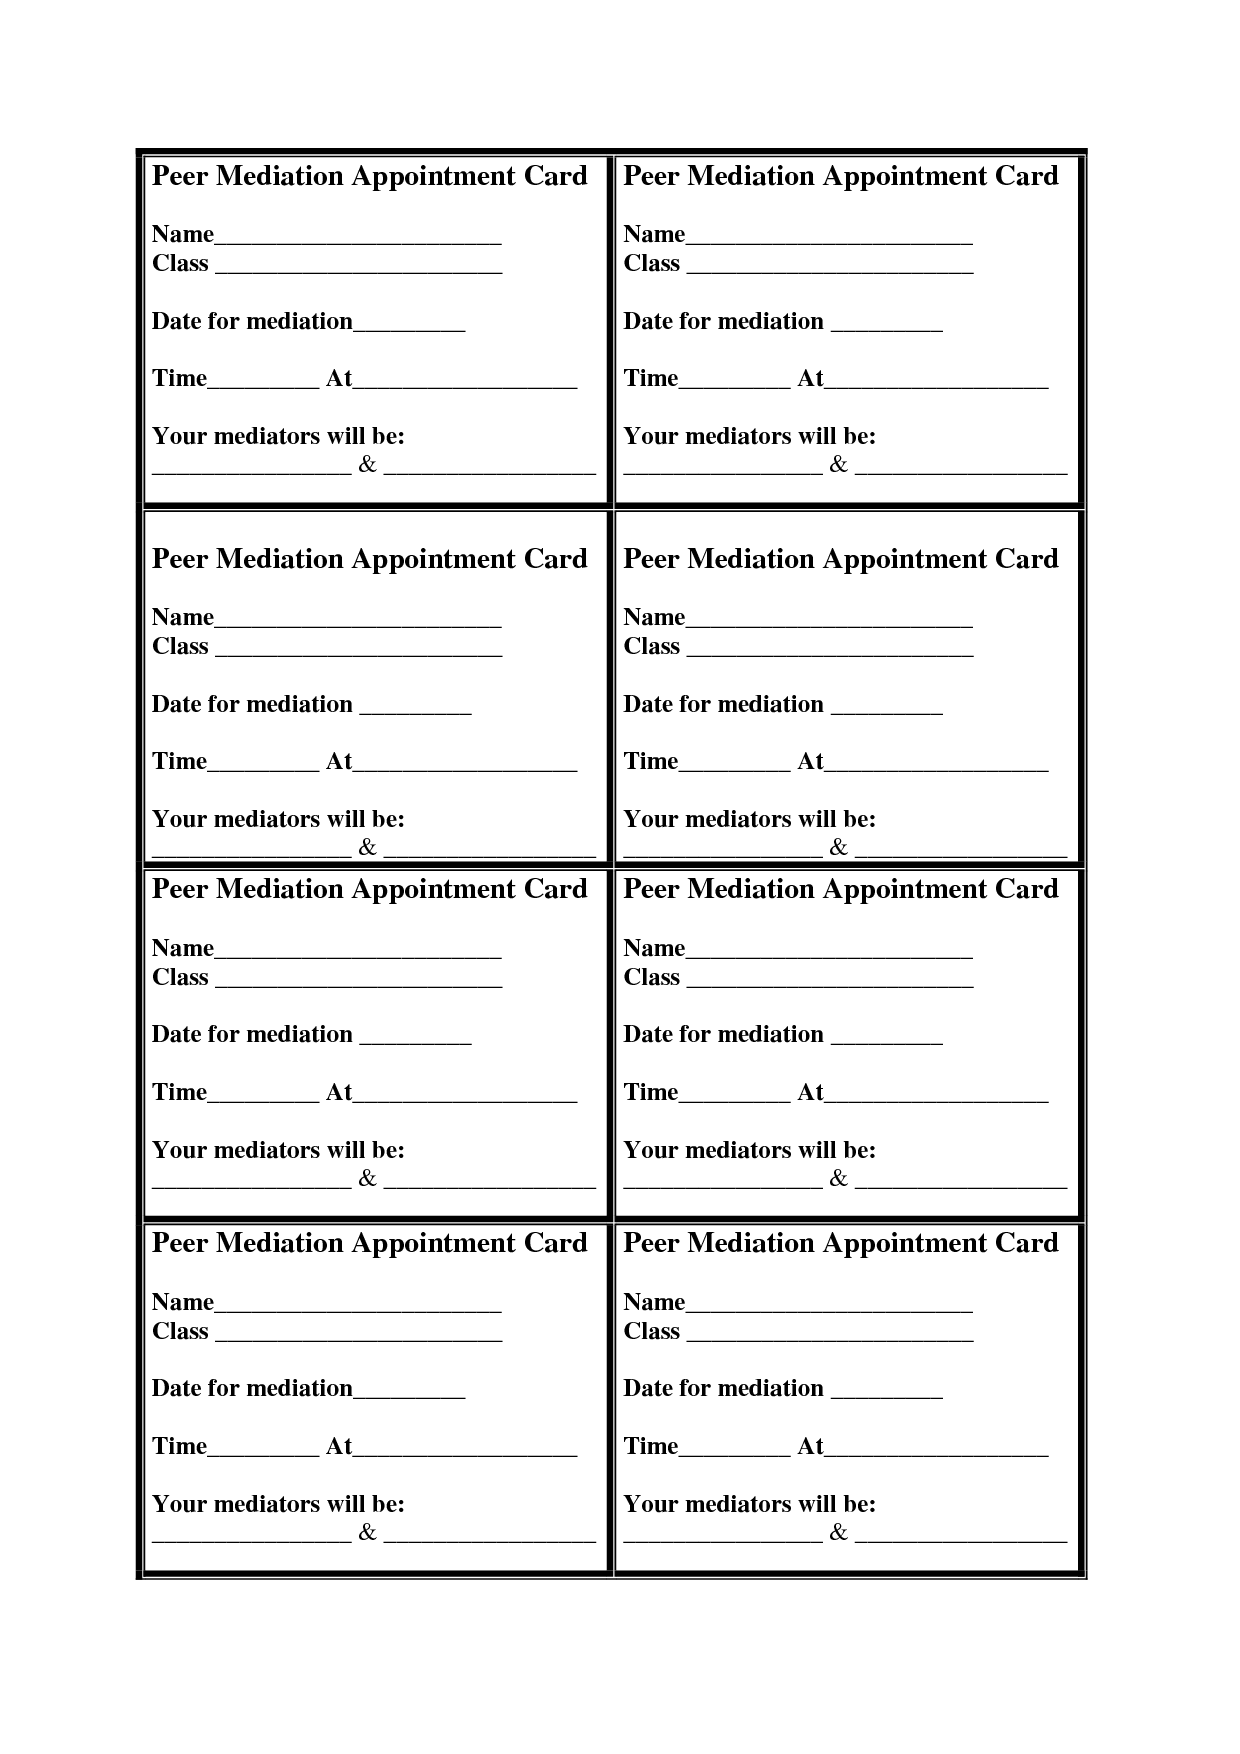 13-how-to-create-appointment-card-template-printable-photo-by